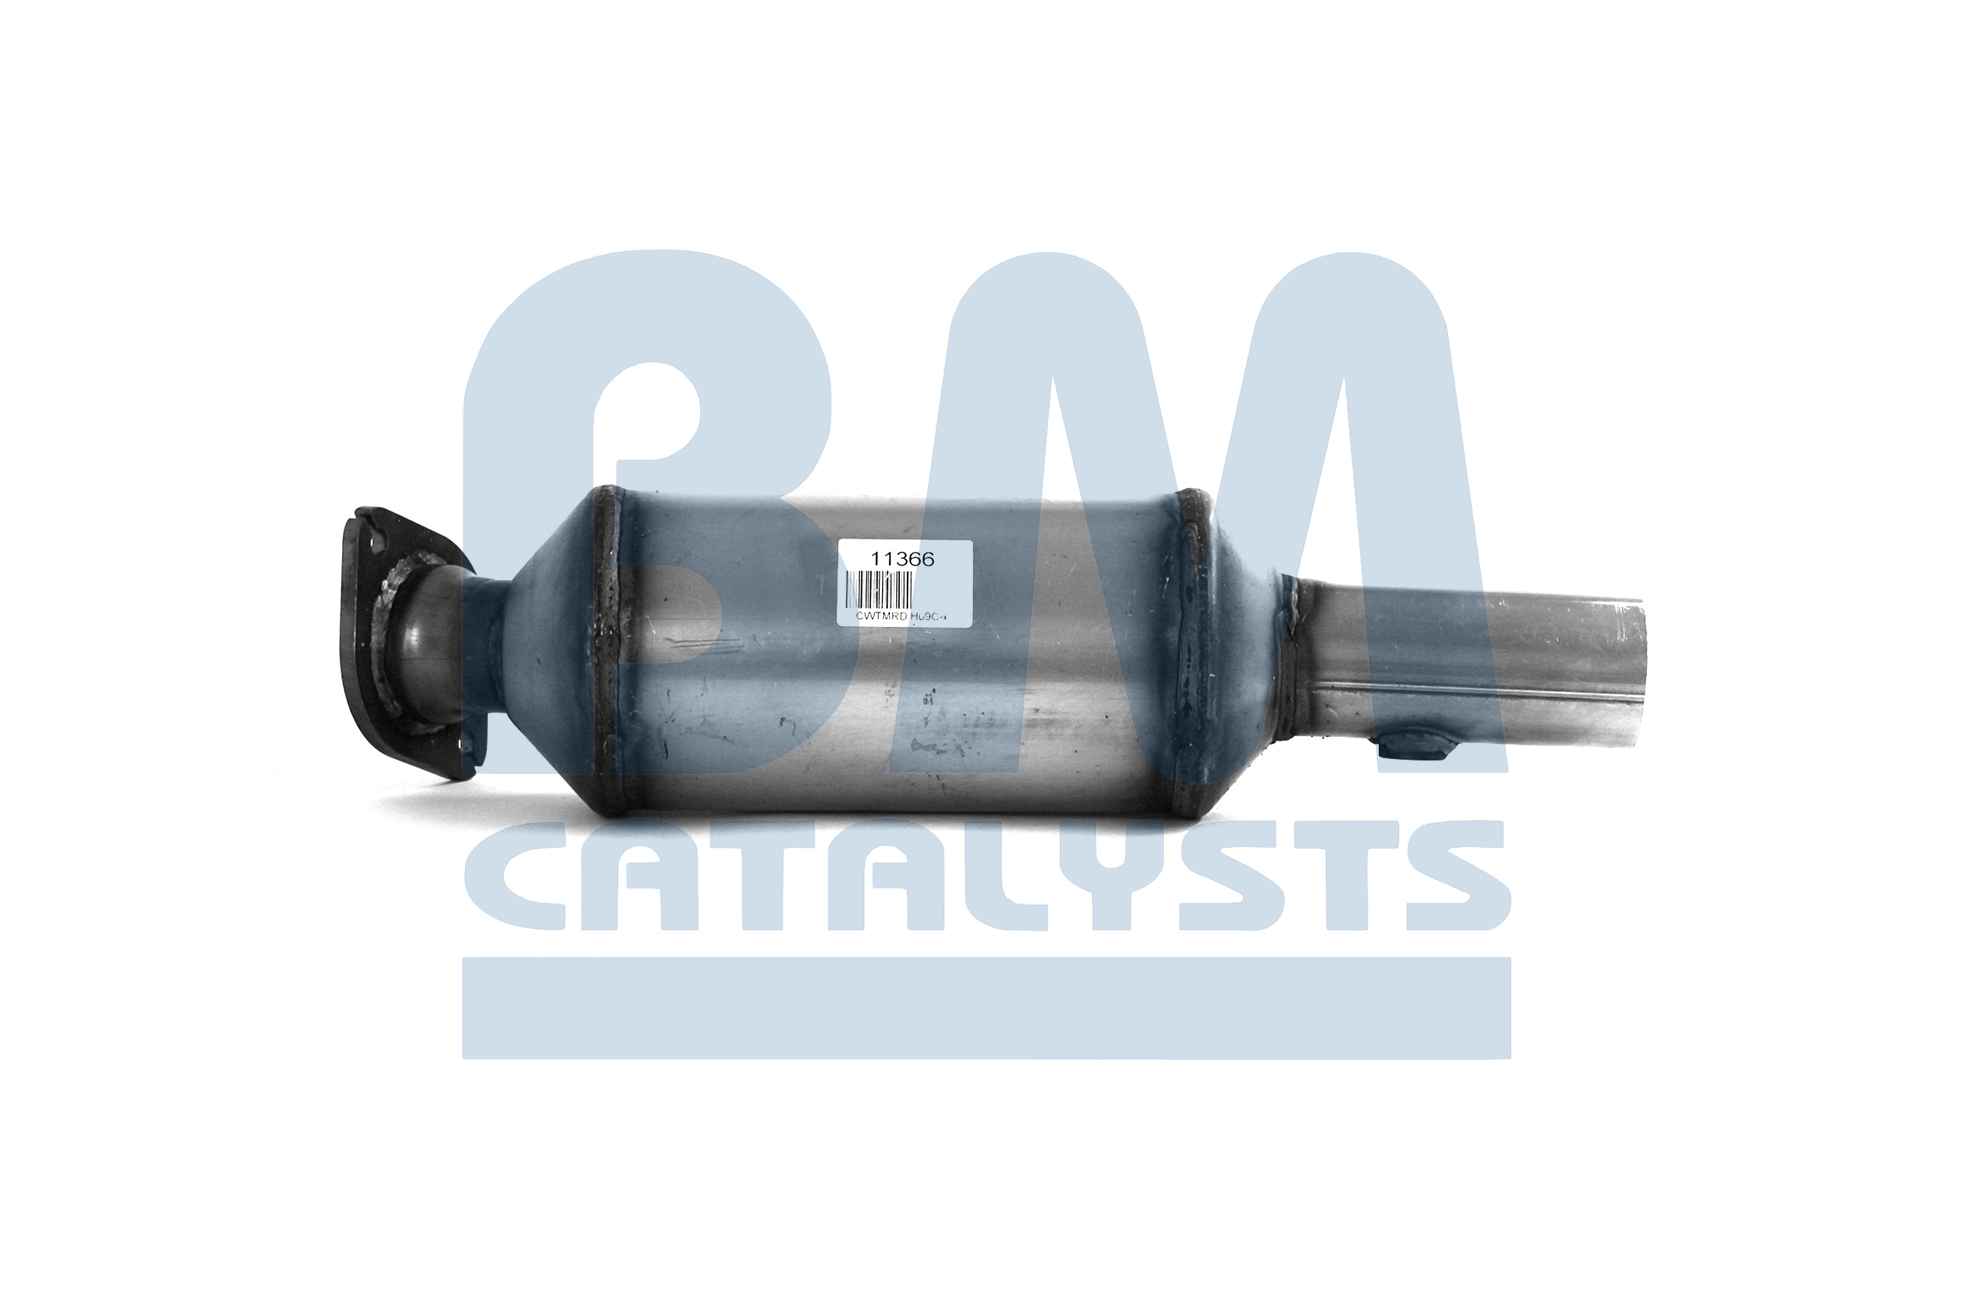 BM CATALYSTS BM11366 Diesel particulate filter CHRYSLER experience and price